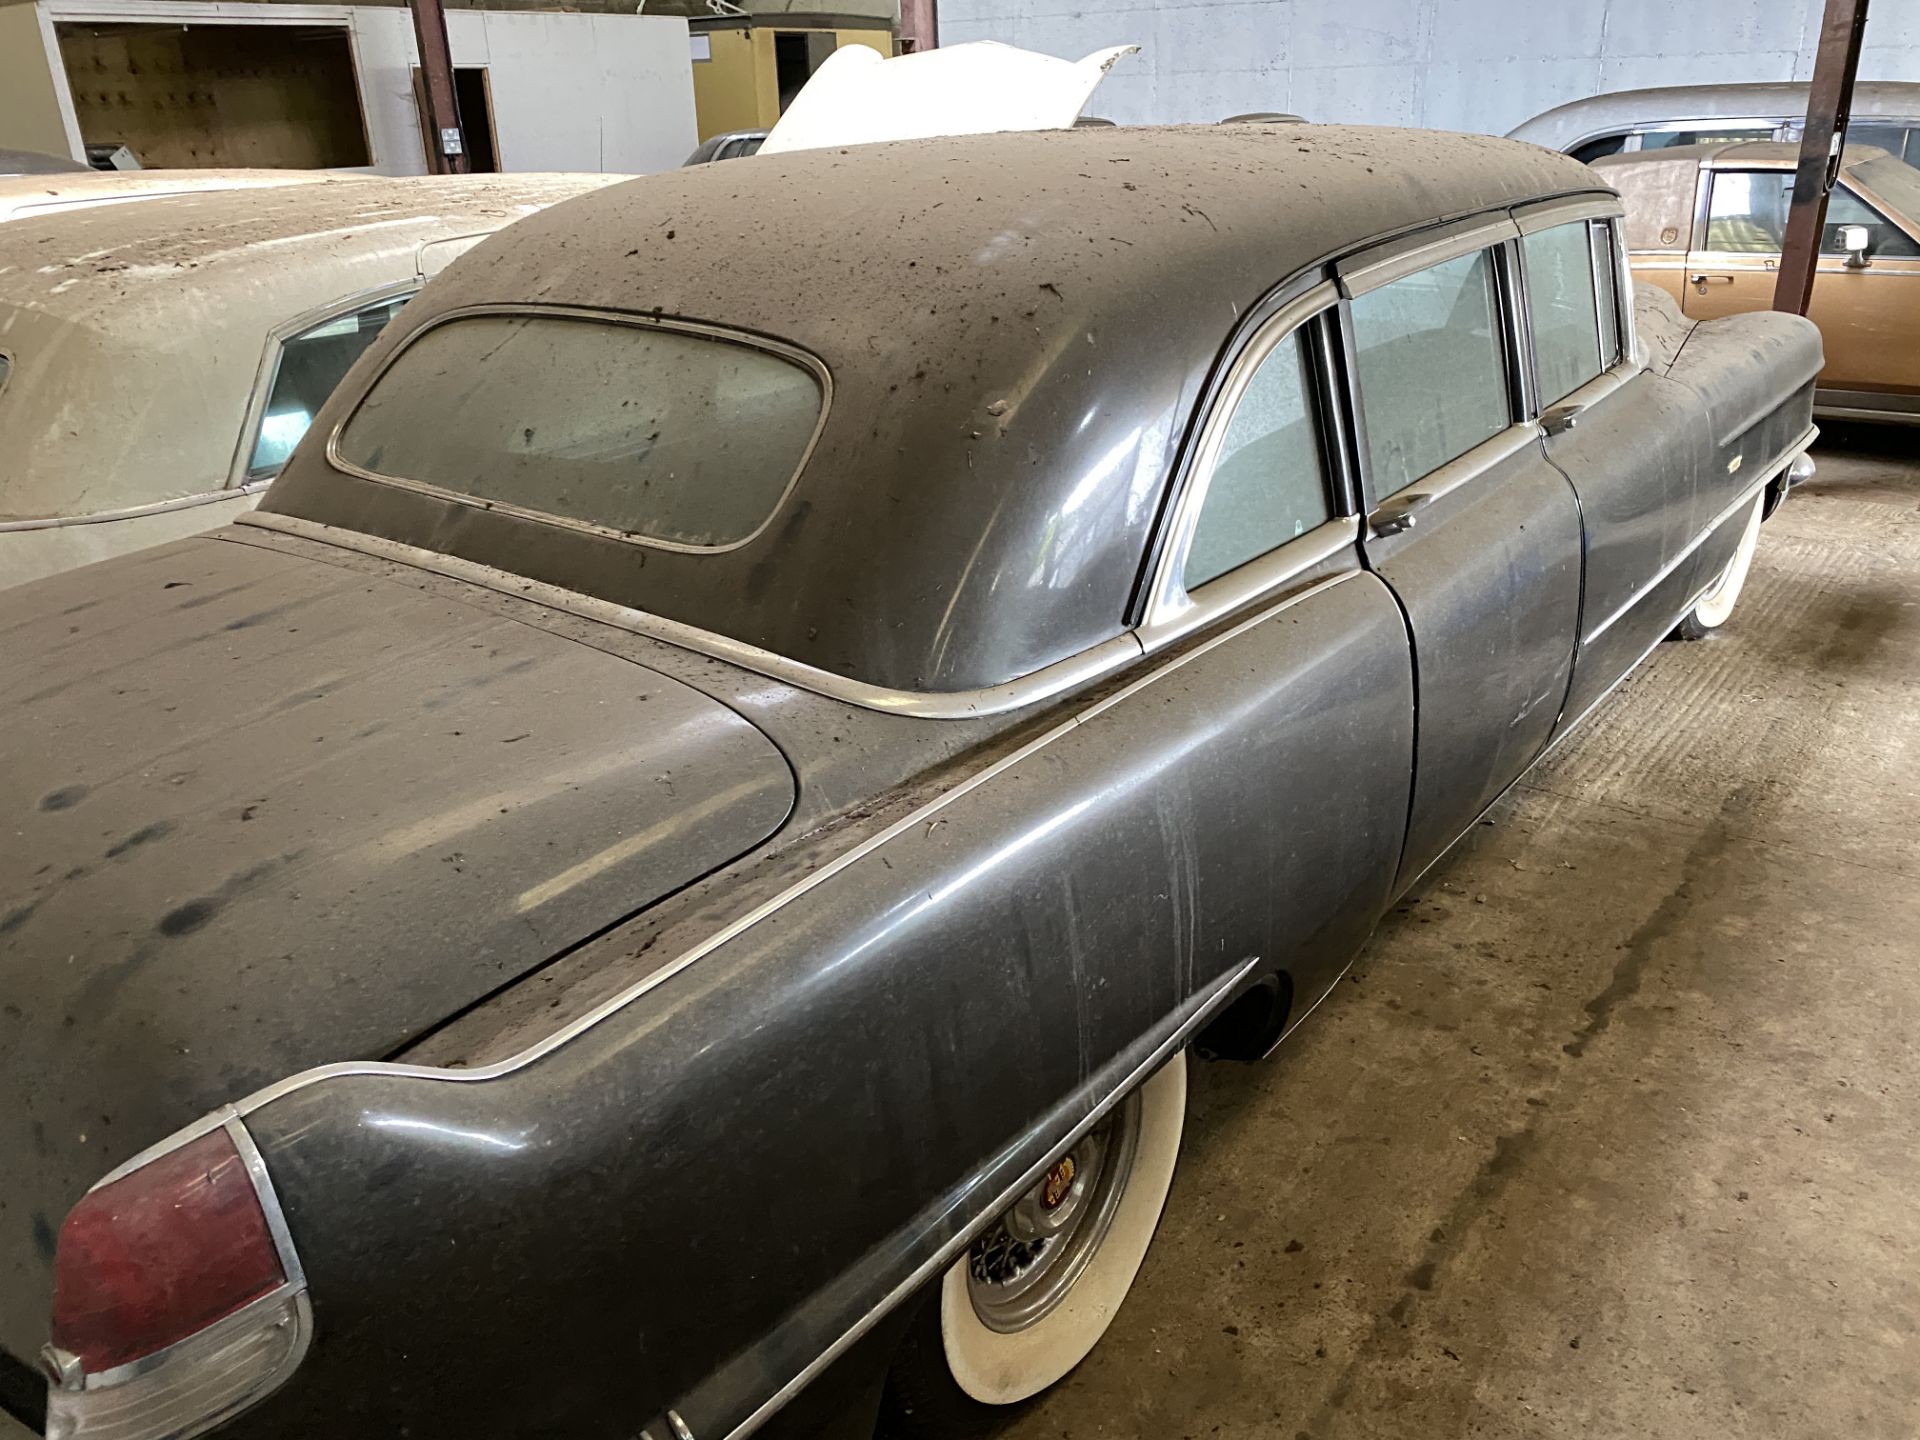 APPROX 1956 CADILLAC FLEETWOOD 75 FACTORY LIMO IN BLACK - BODY NO: 248 - WITH KEYS - Image 6 of 13